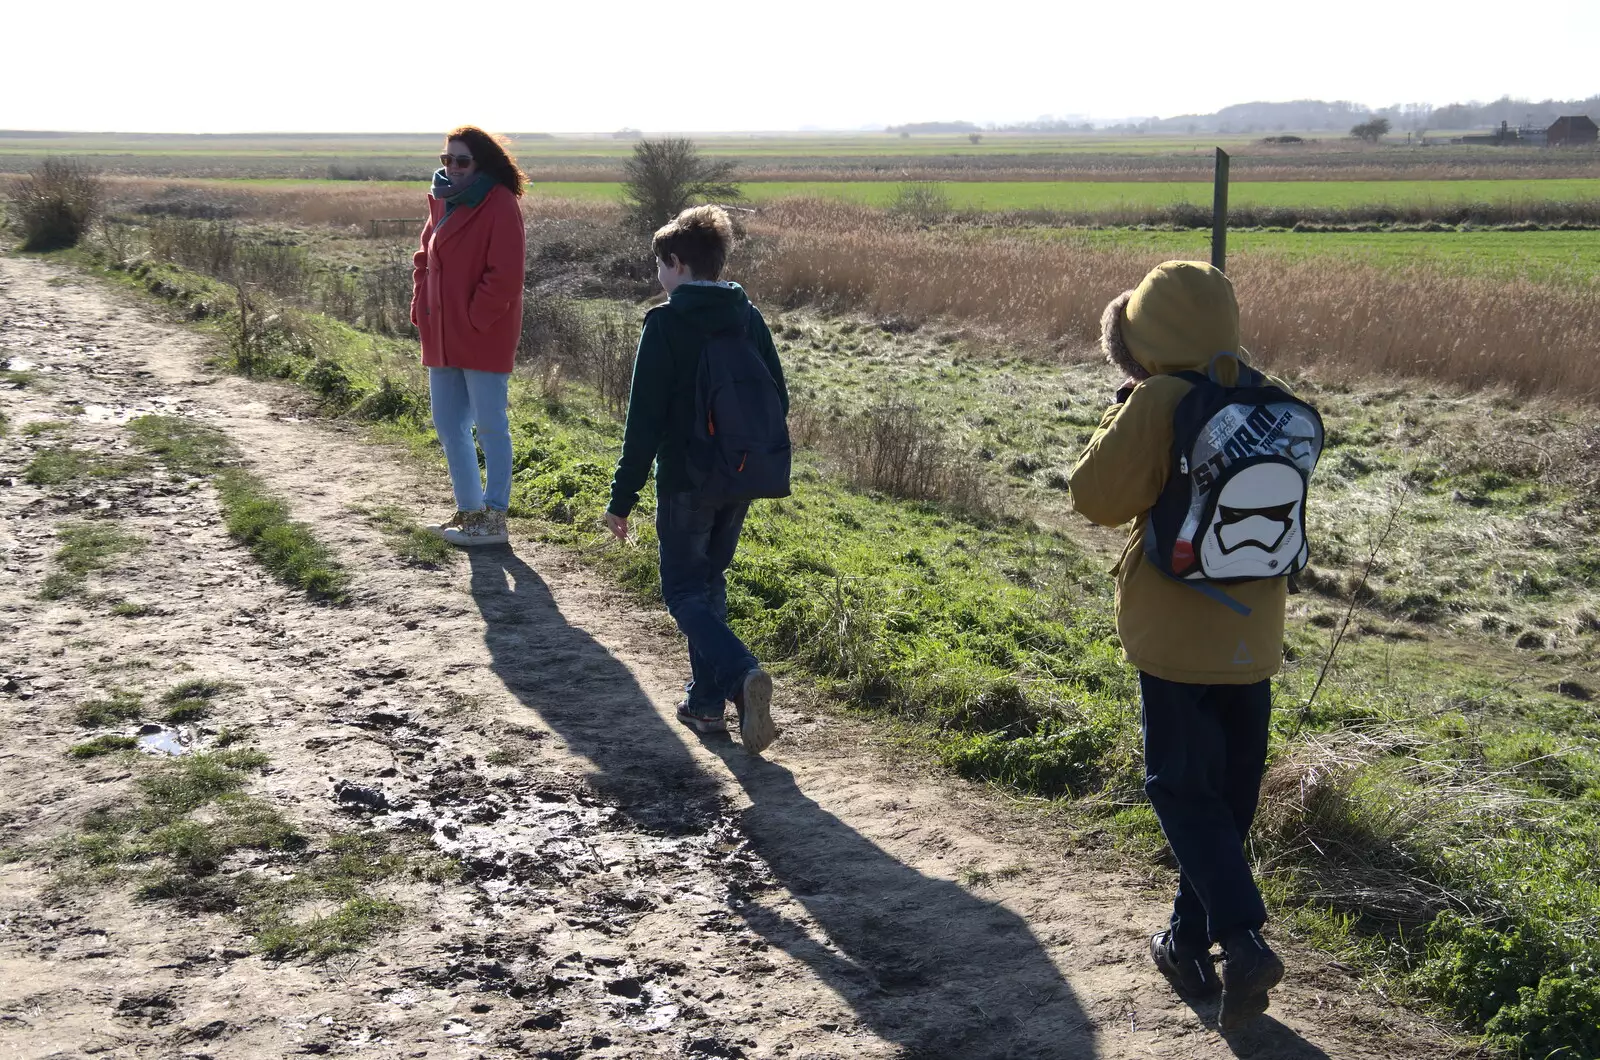 We head off around the coast path again, from A Trip to Orford Castle, Orford, Suffolk - 26th February 2022